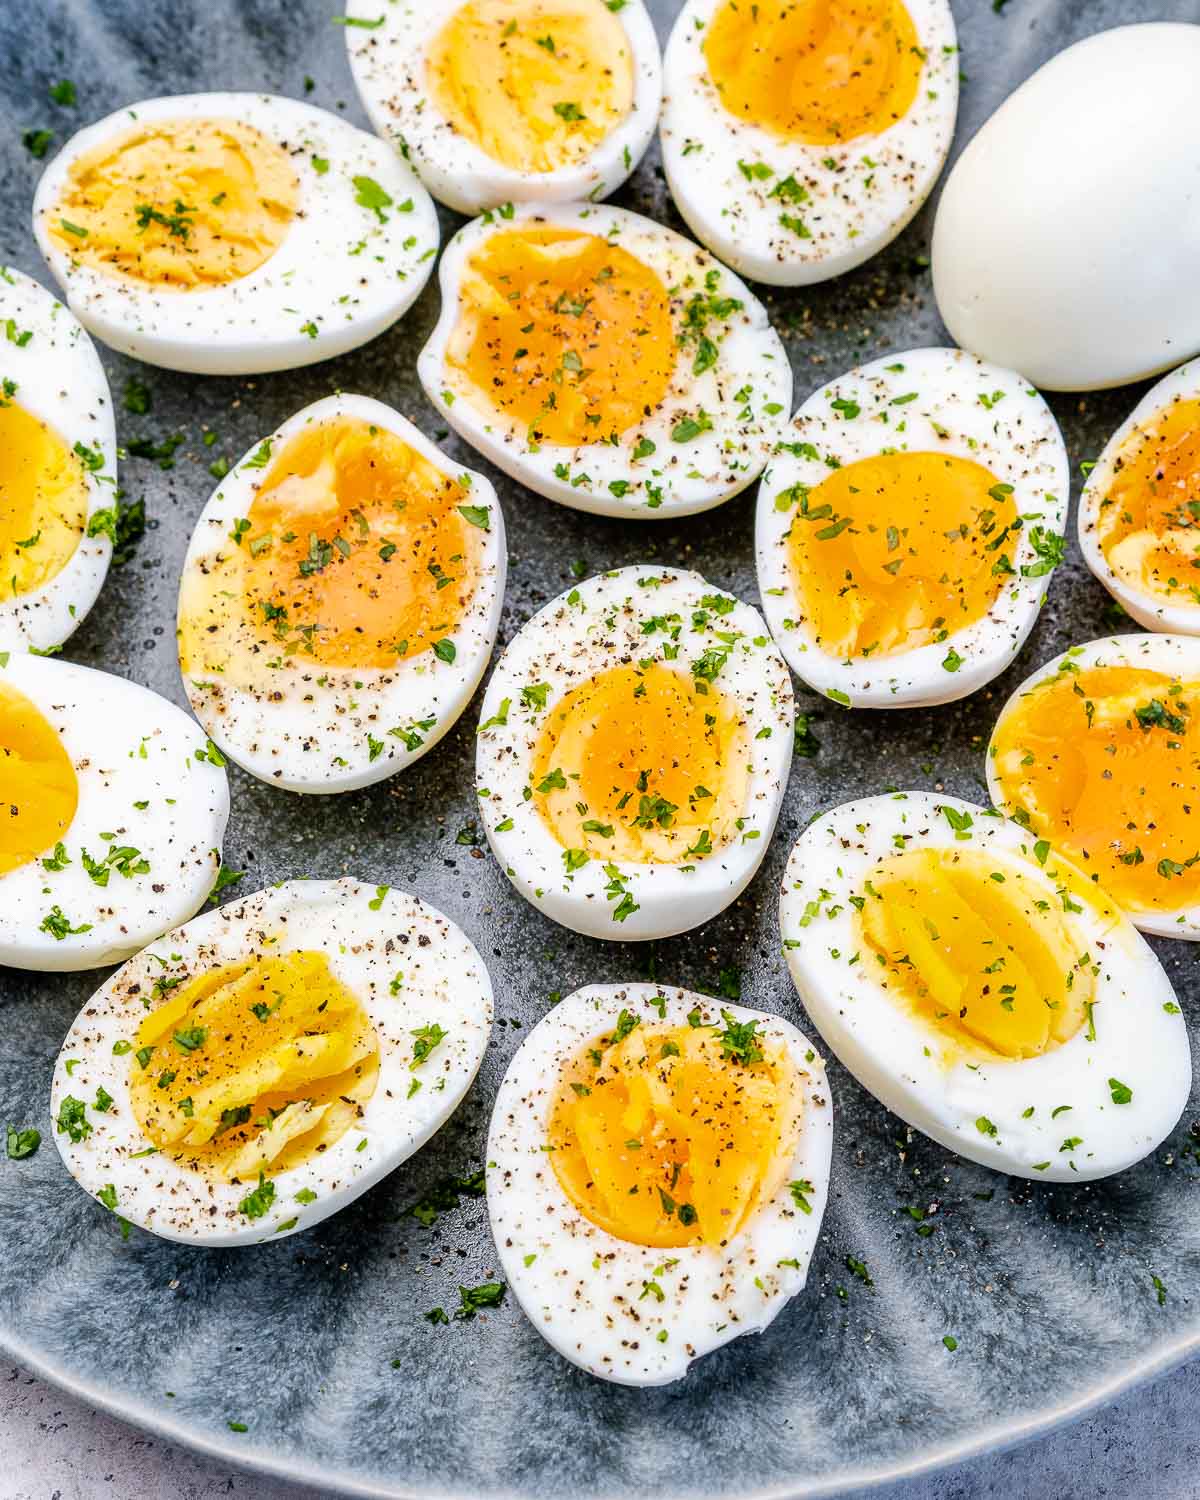 How to make Hard Boiled Eggs (perfectly)